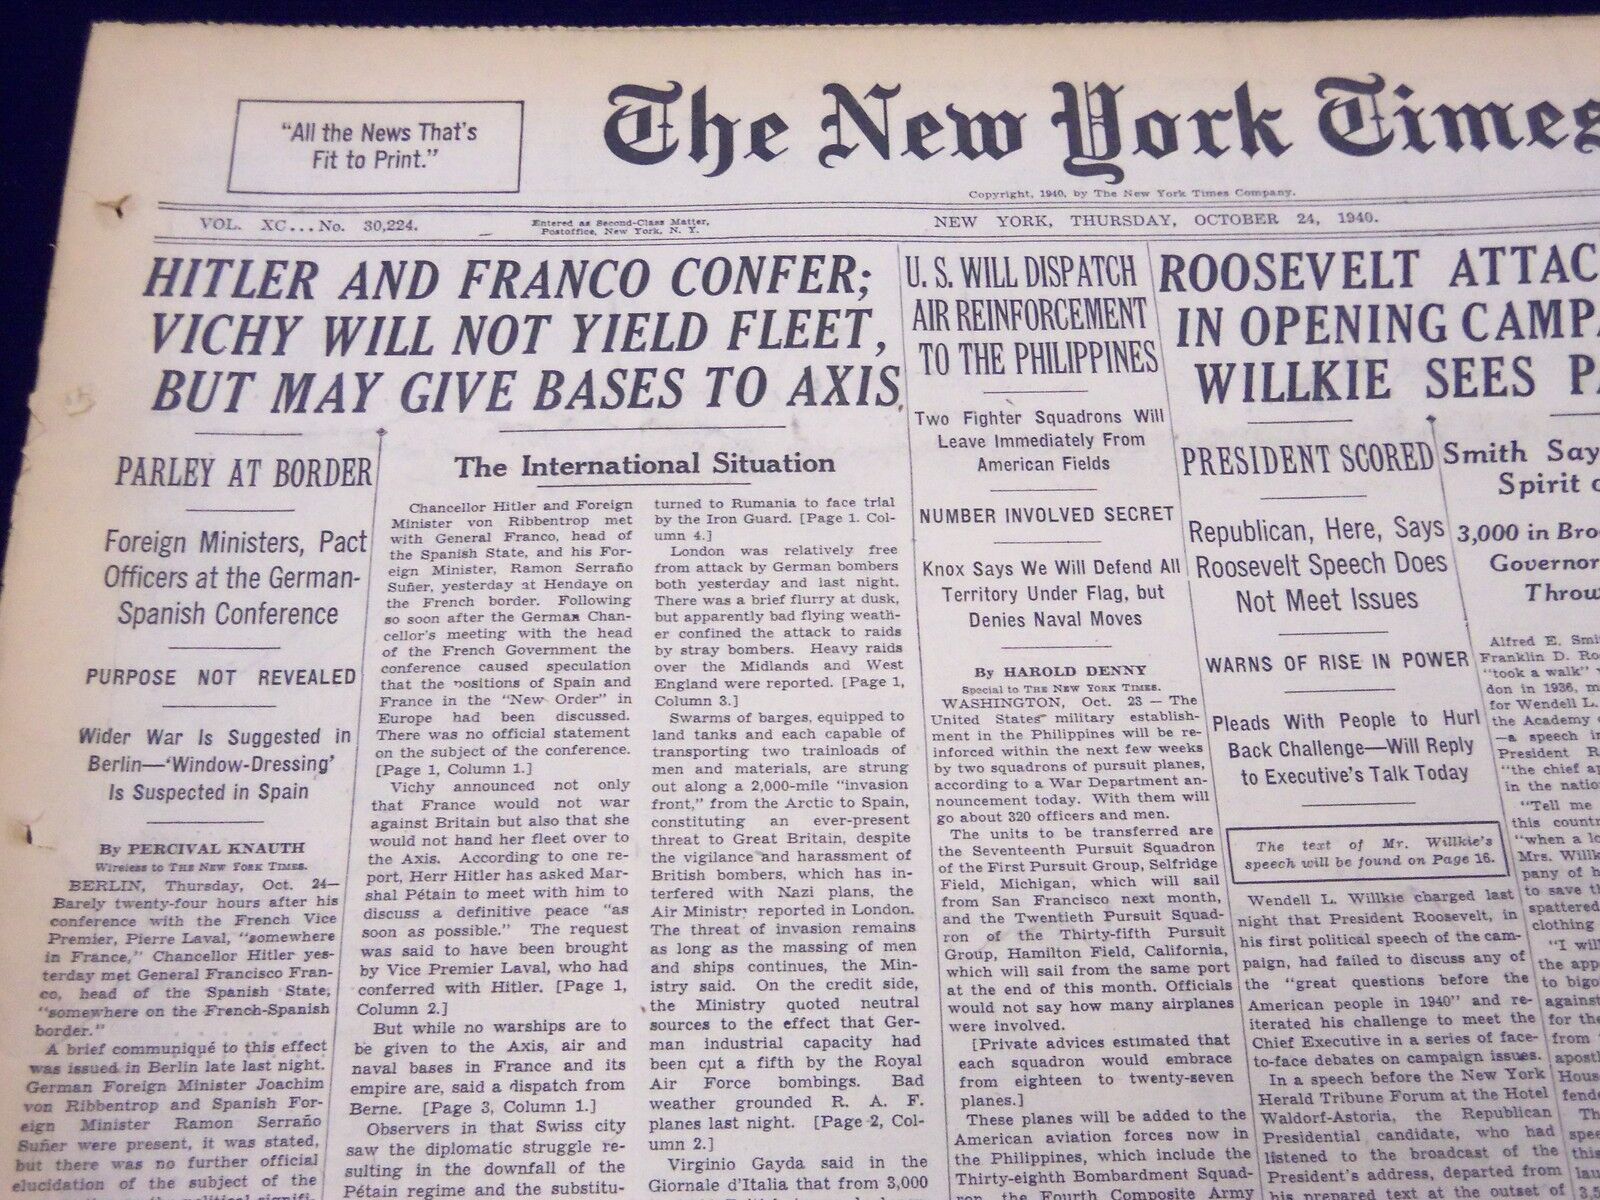 1940 OCTOBER 24 NEW YORK TIMES - HITLER AND FRANCO CONFER - NT 319